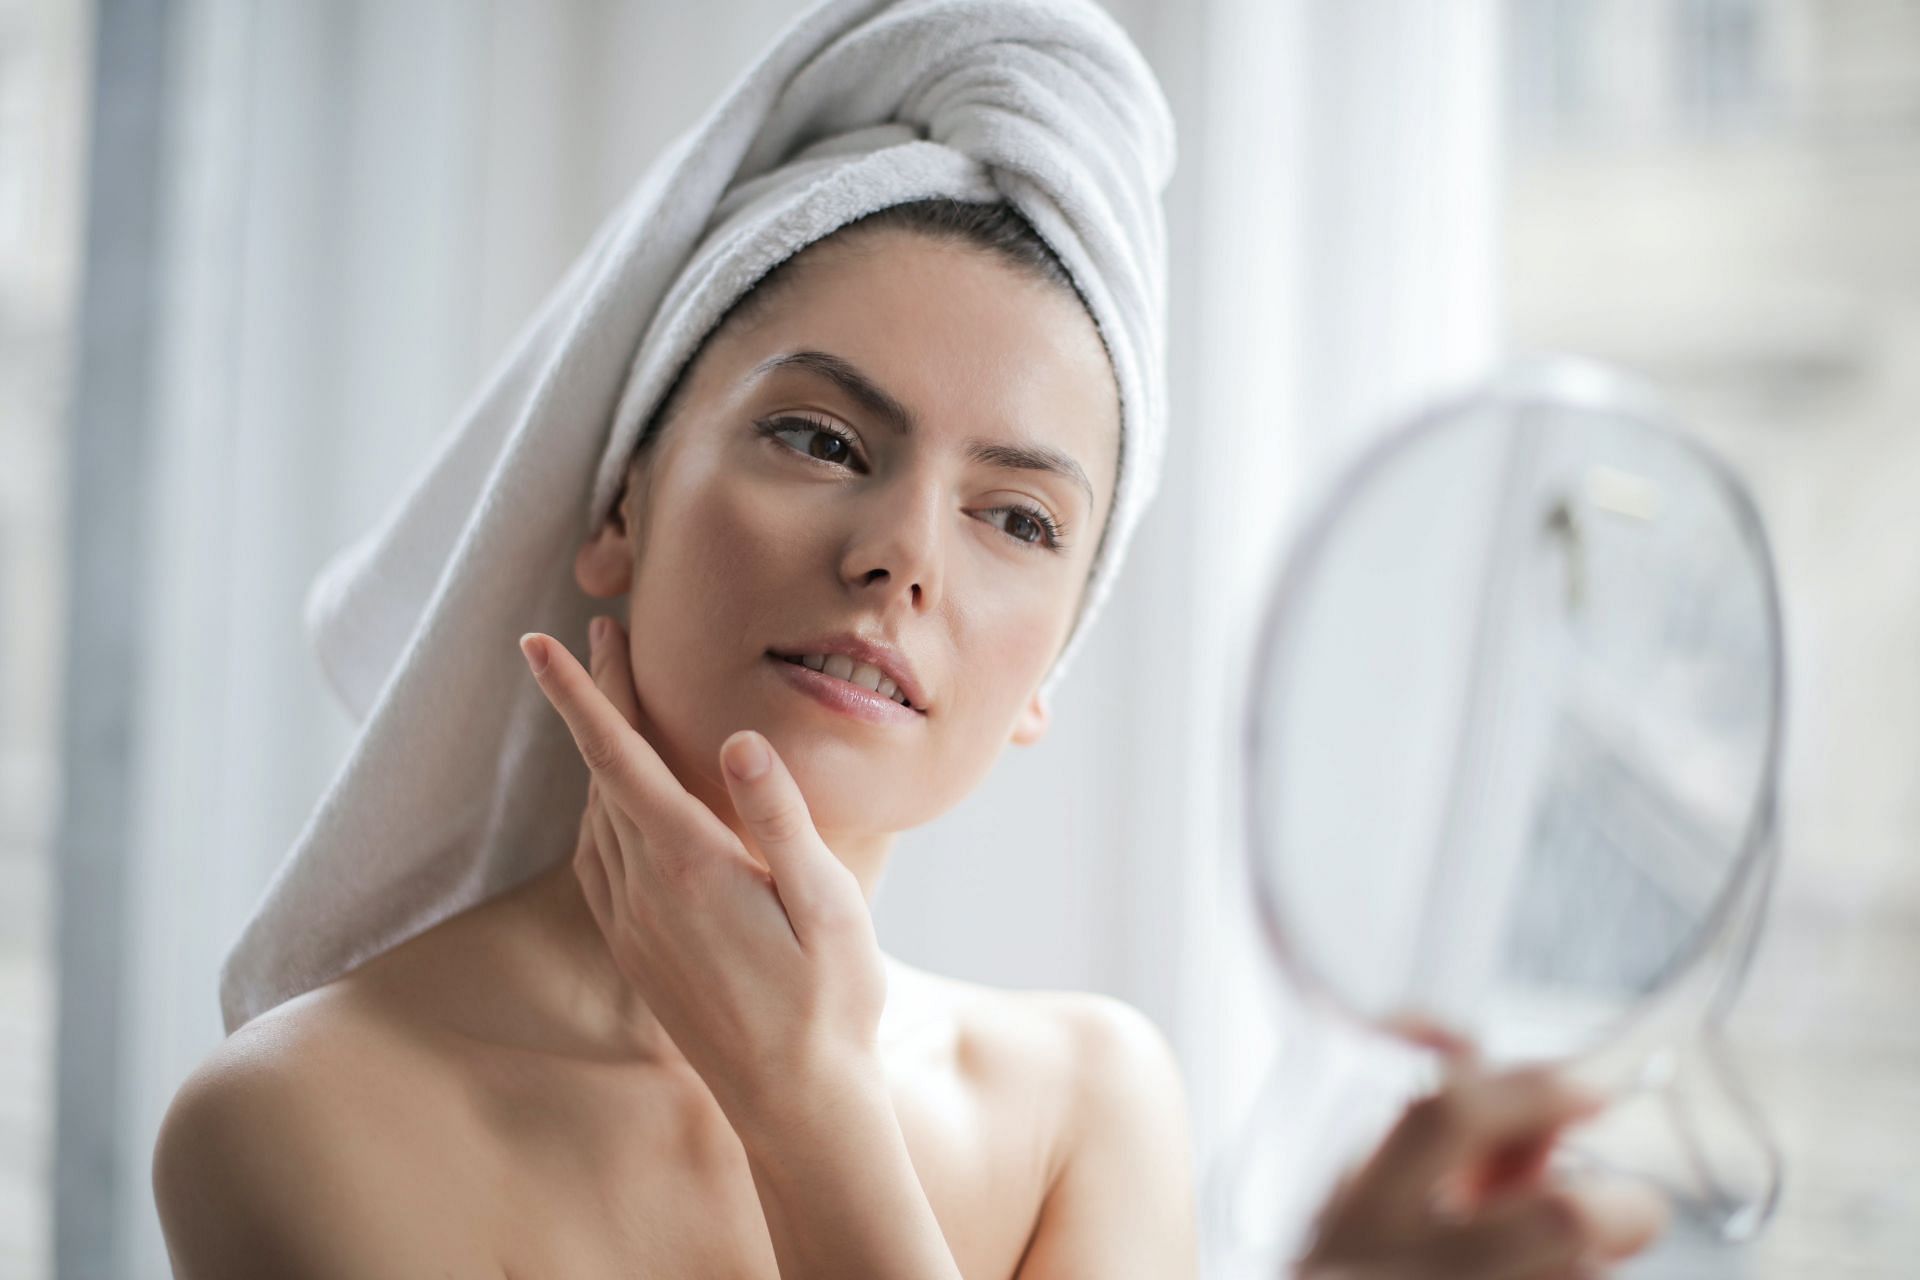 Importance of smooth skin (image sourced via Pexels / Photo by andrea)